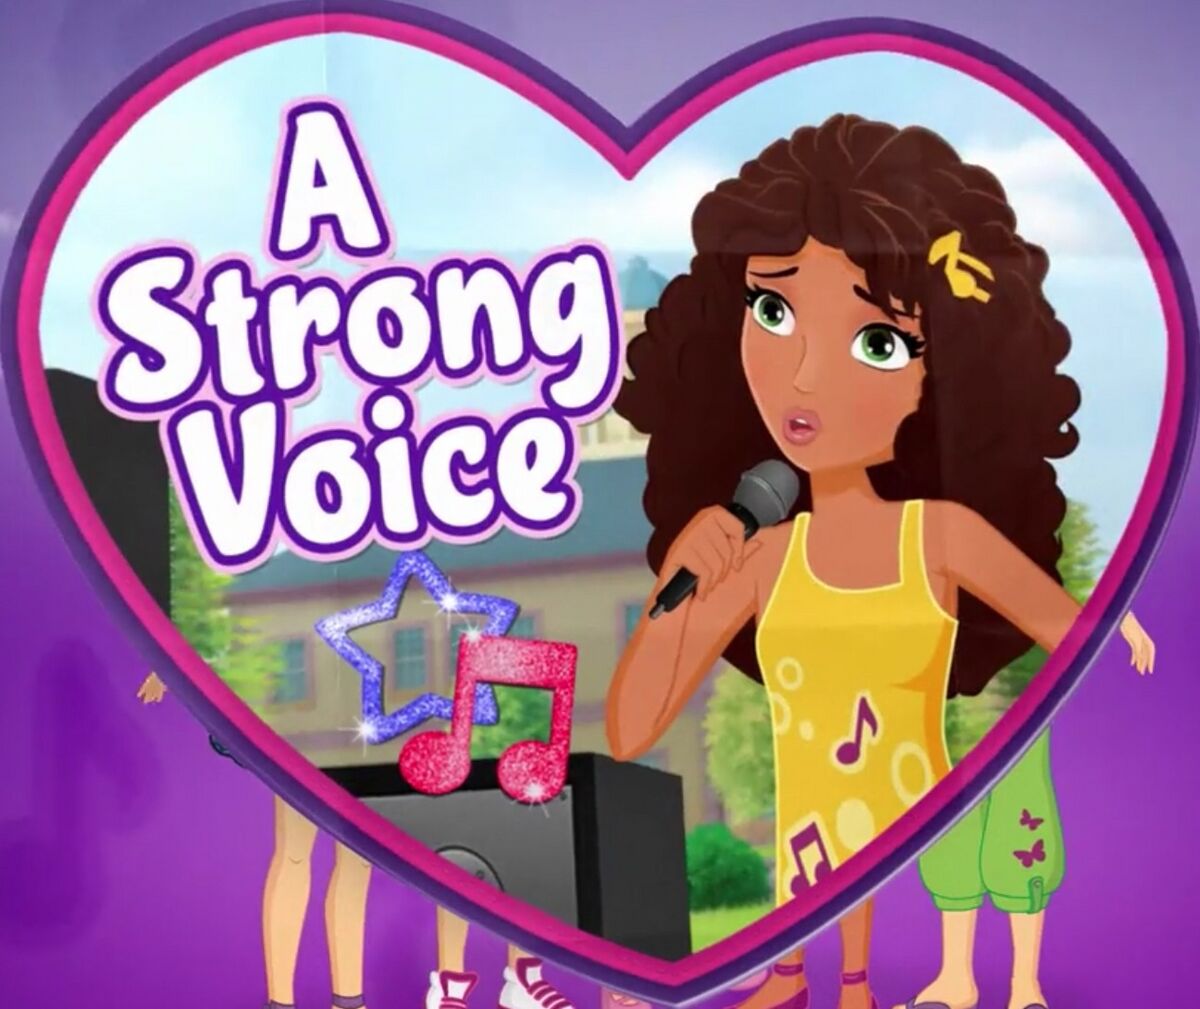 A Strong Voice - Brickipedia, the LEGO Wiki